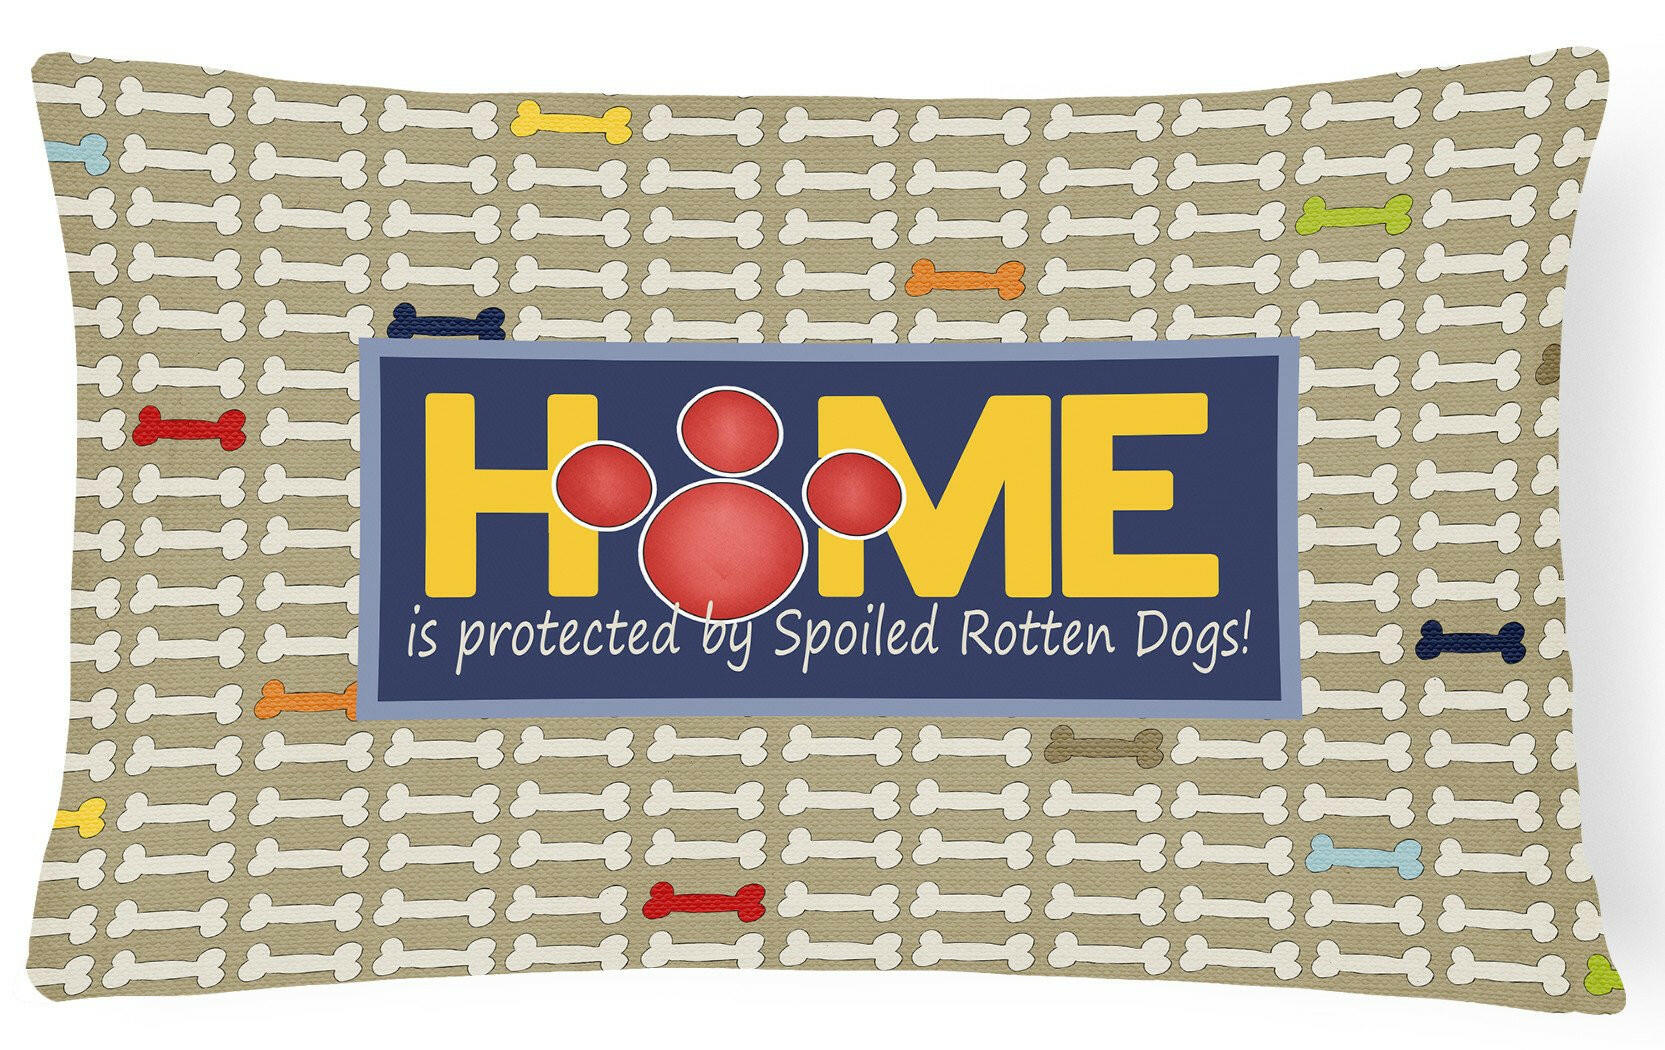 Home is protected by spoiled rotten dogs   Canvas Fabric Decorative Pillow SB3053PW1216 by Caroline's Treasures